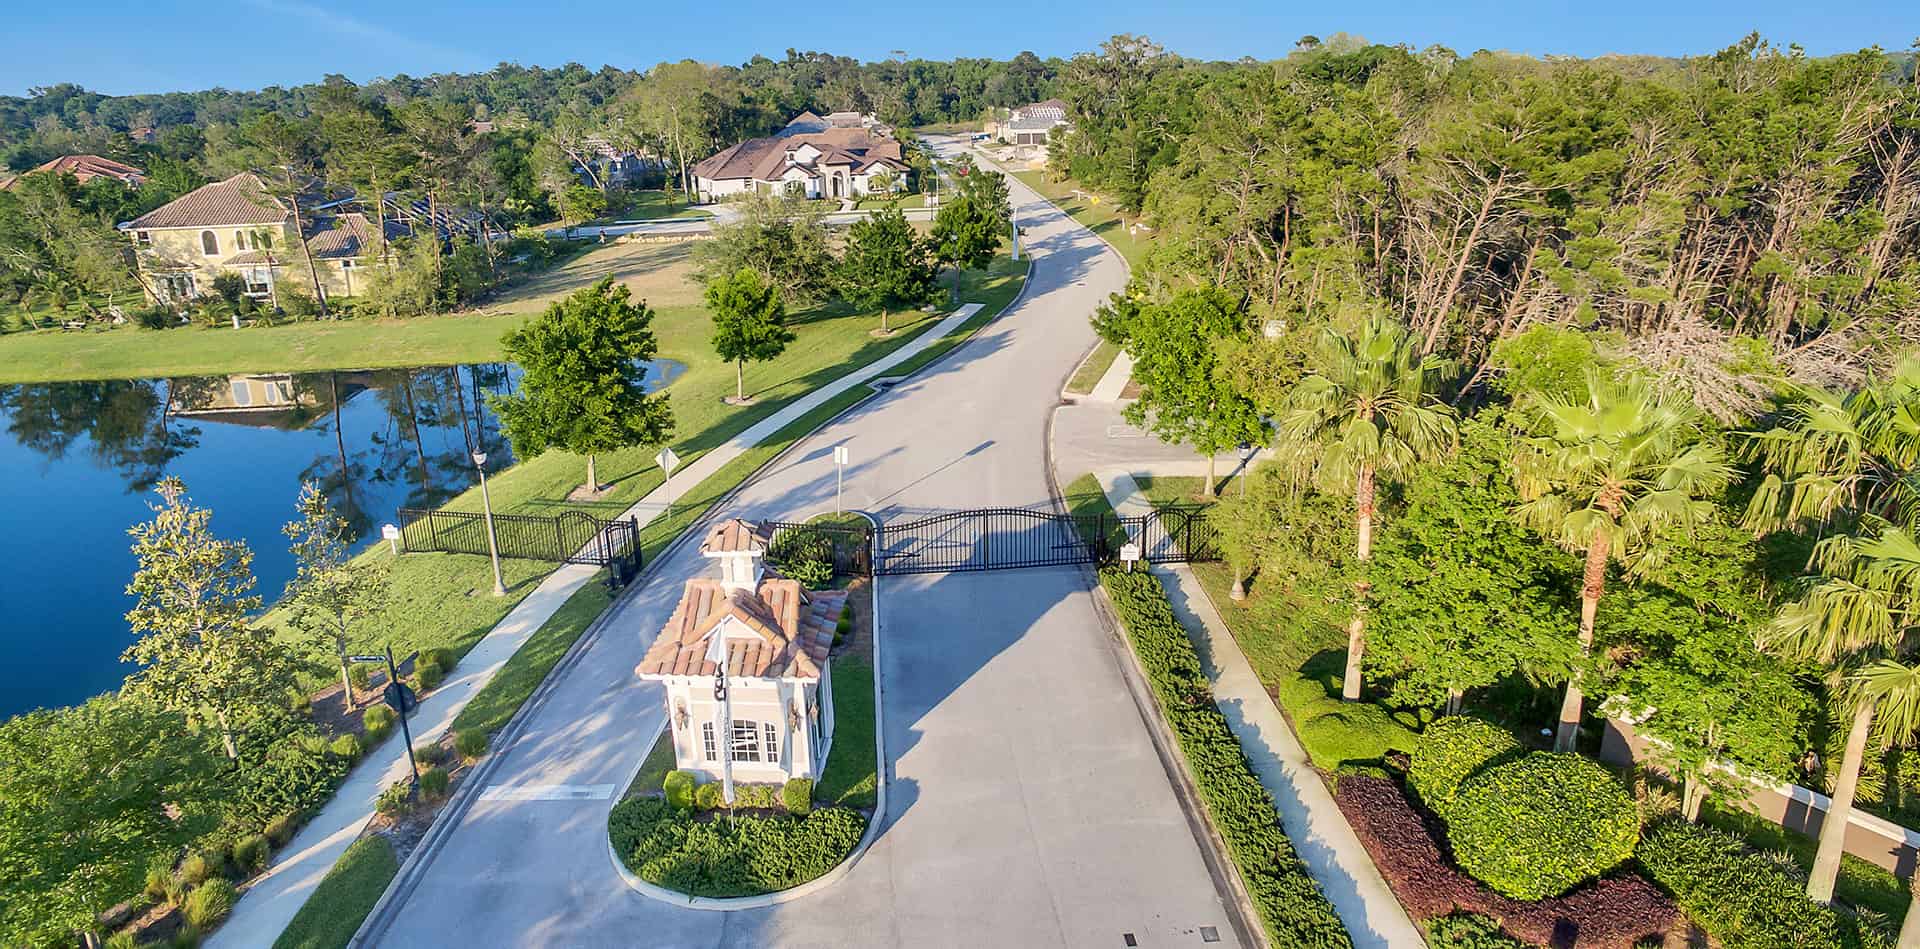 Toscana - our gated community in Palm Coast Florida